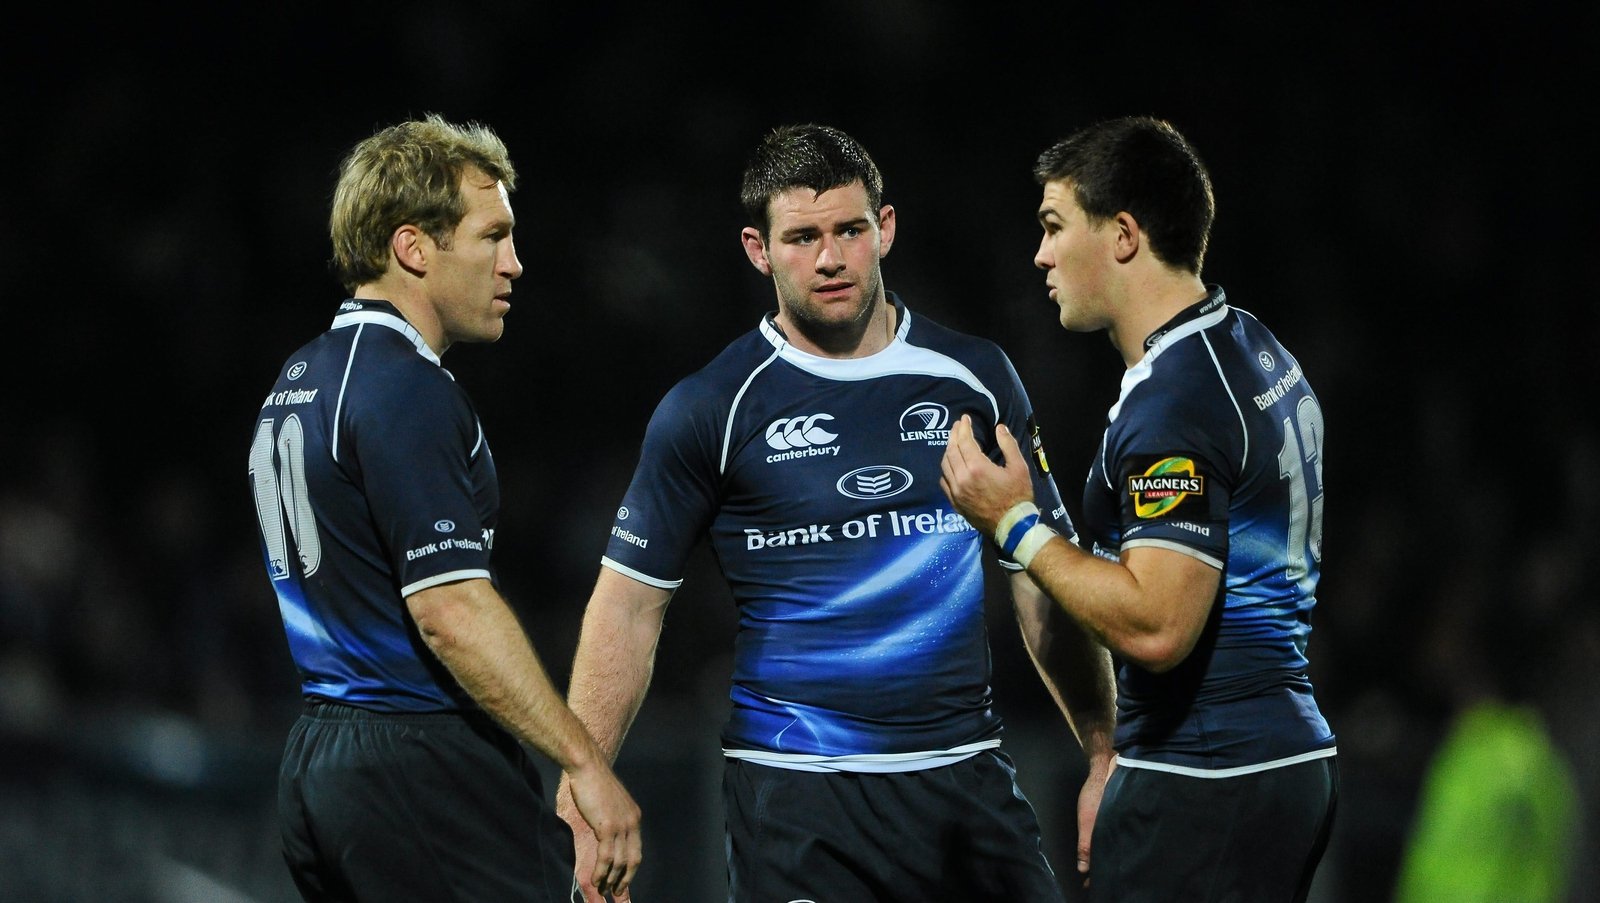 Image - Shaun Berne, Fergus McFadden and Eoin O'Malley in conversation during a Leinster match in 2010